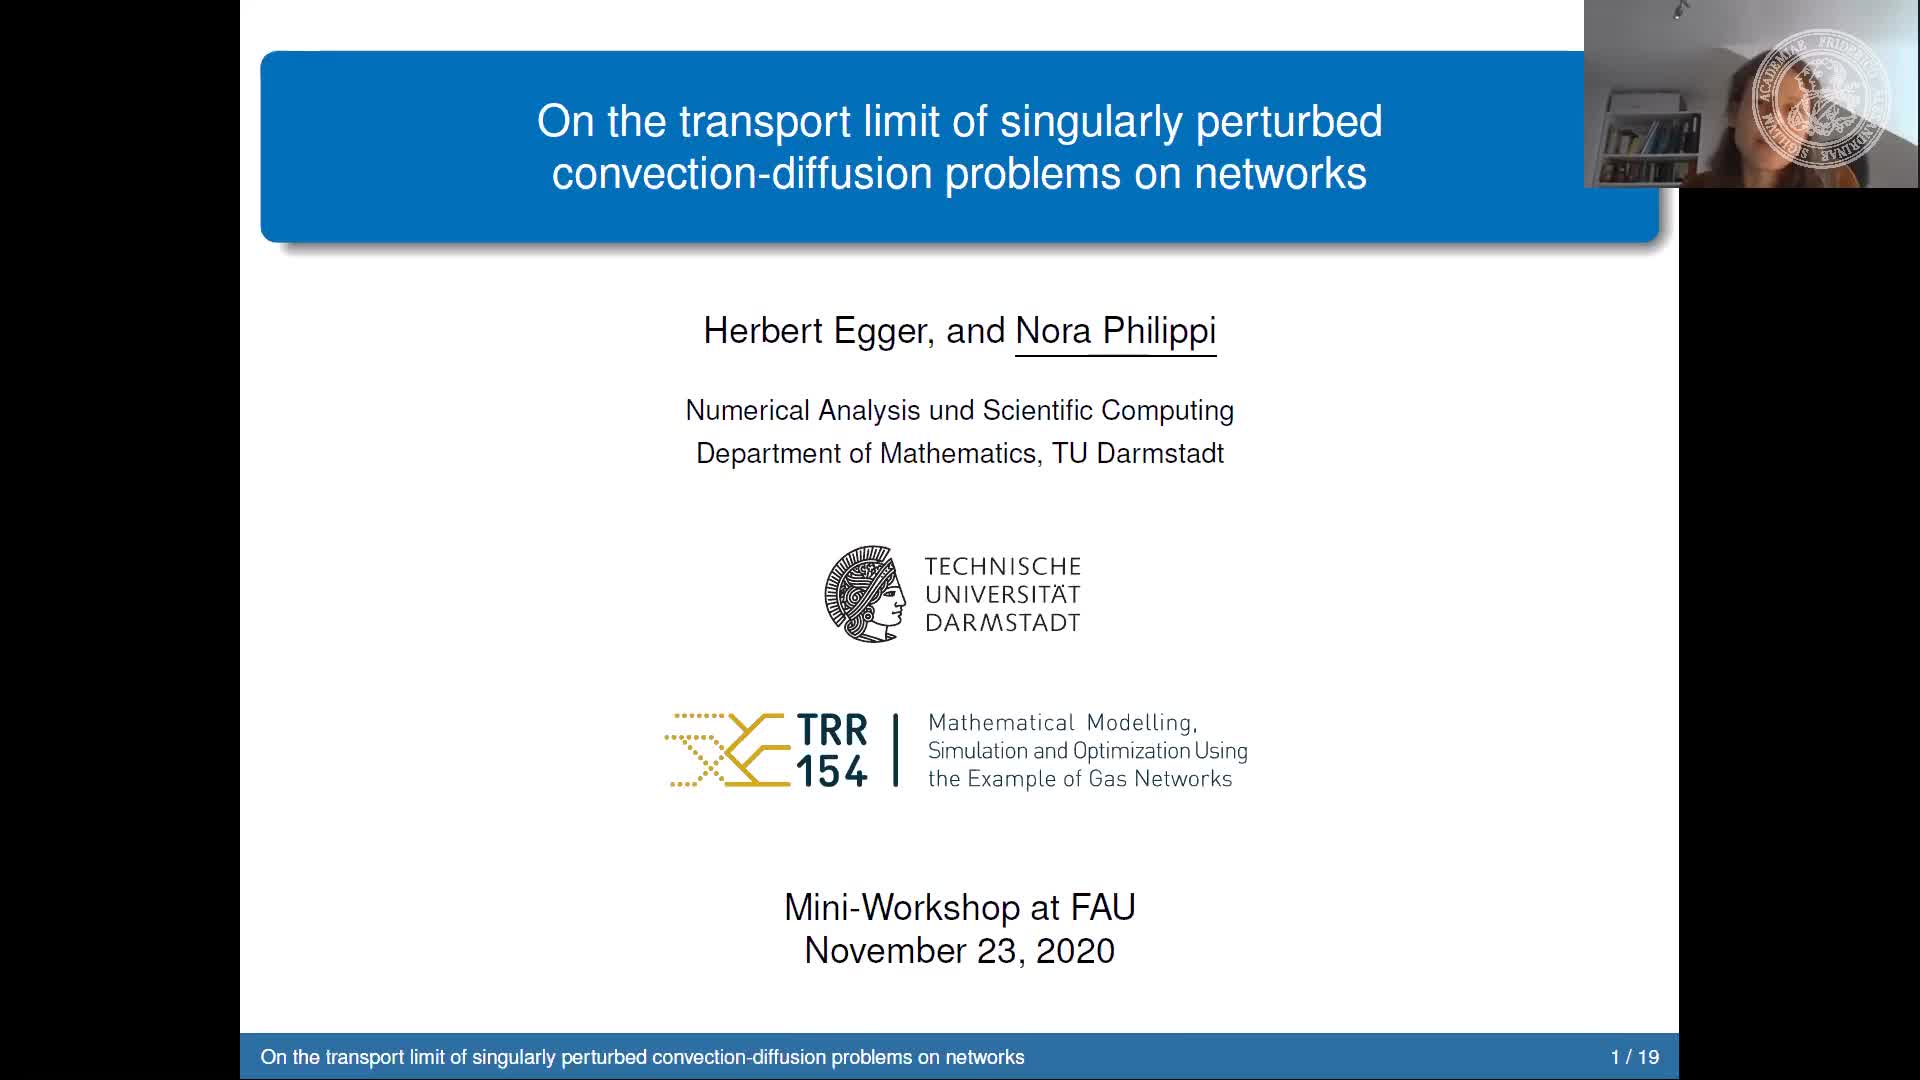 On the transport limit of singularly perturbed convection-diffusion problems on networks (Nora Marie Philippi, TU Damstadt) preview image